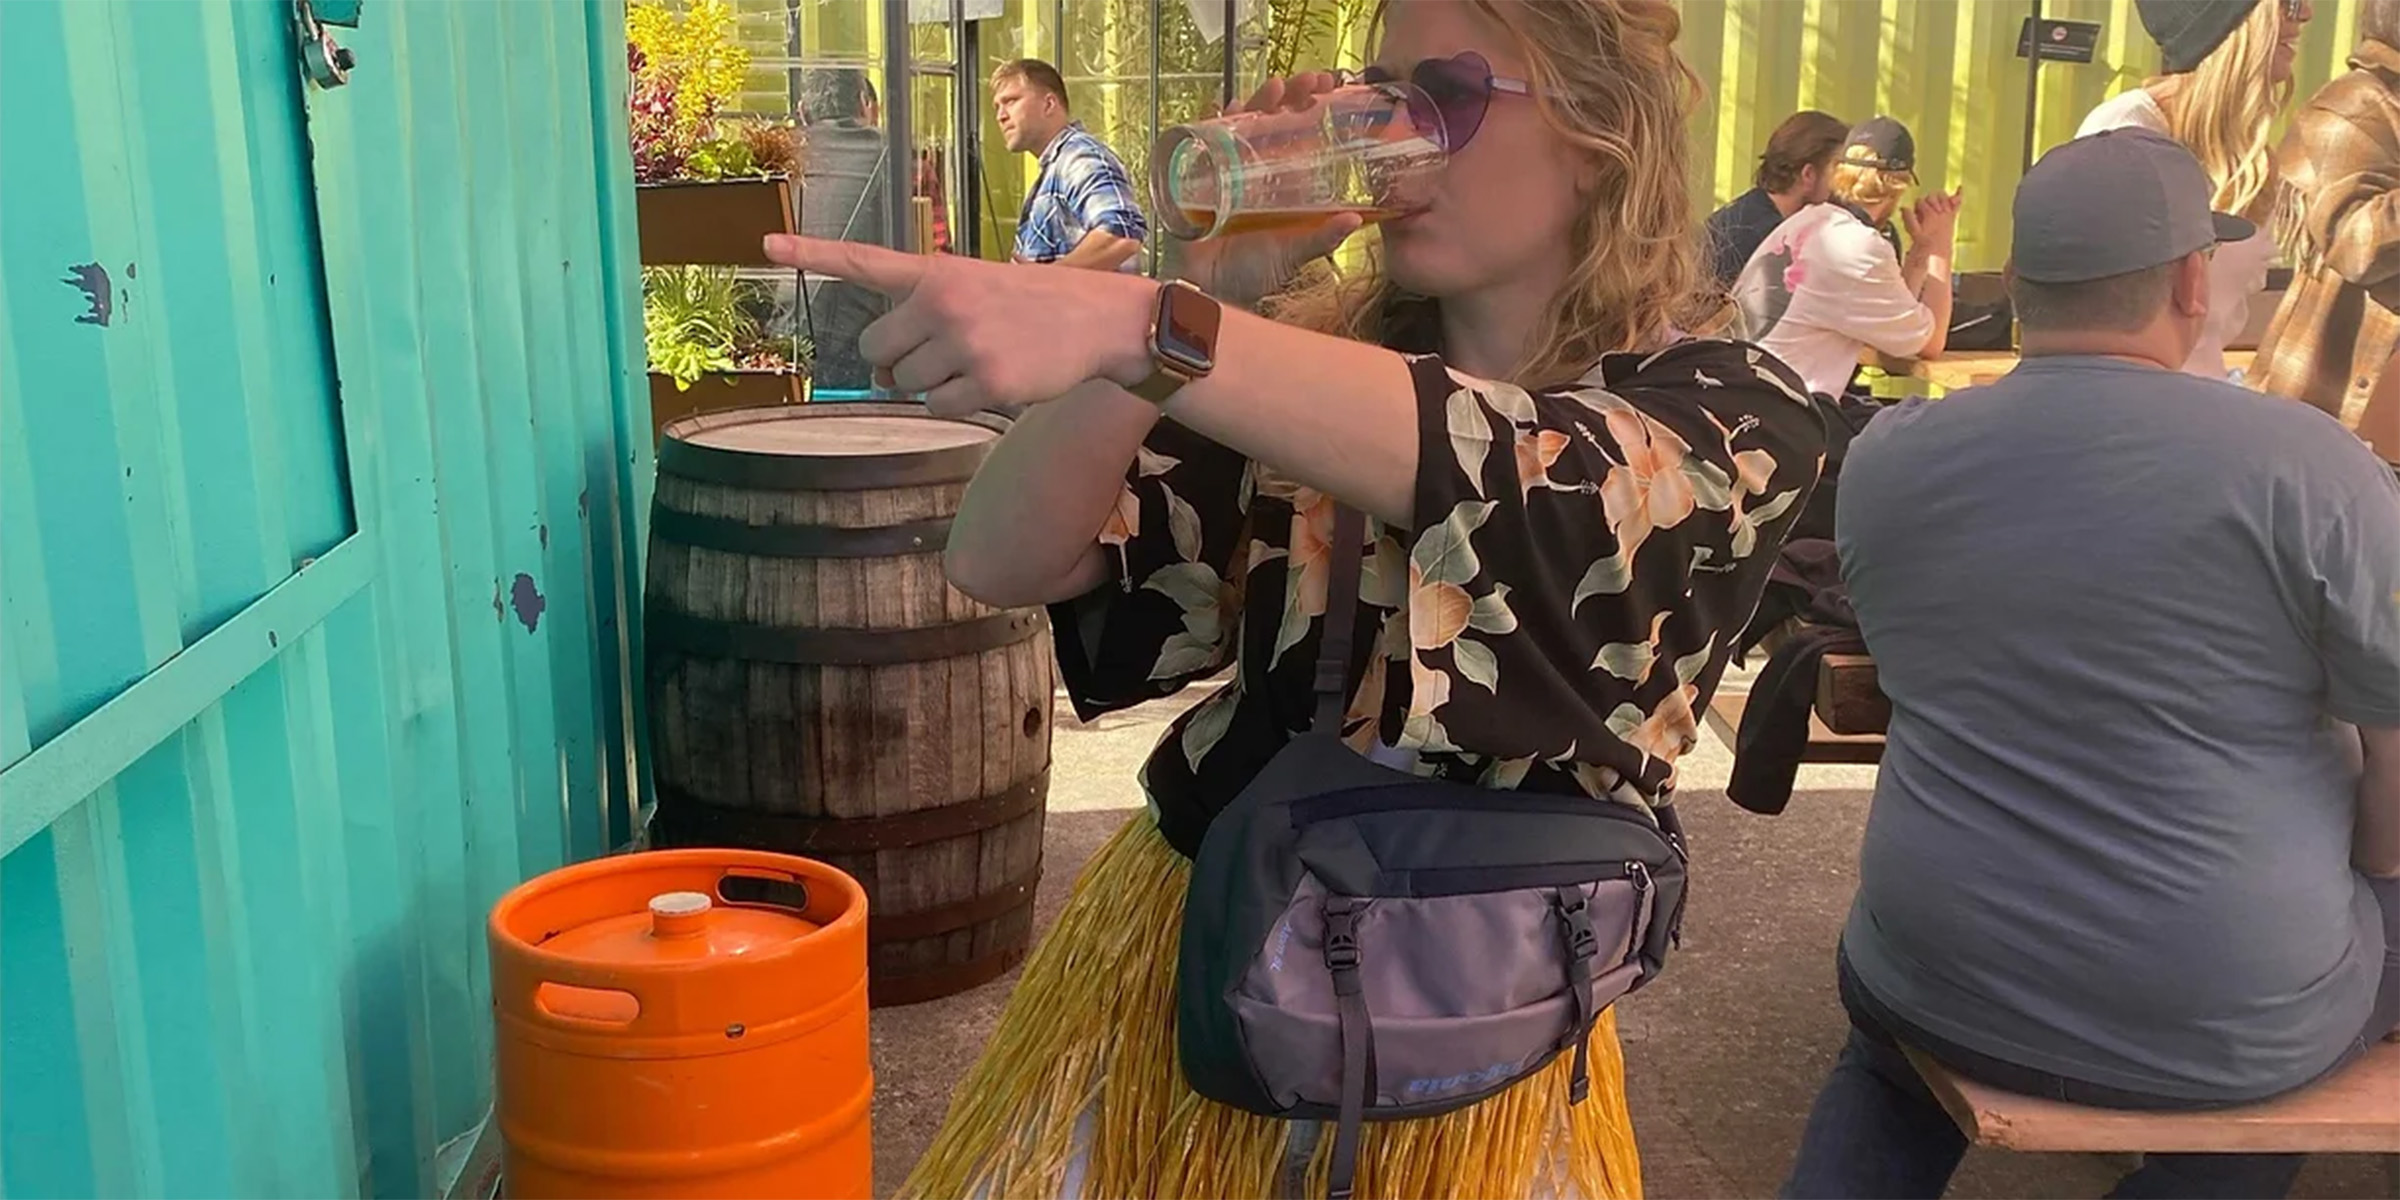 Woman drinking a beer and pointing